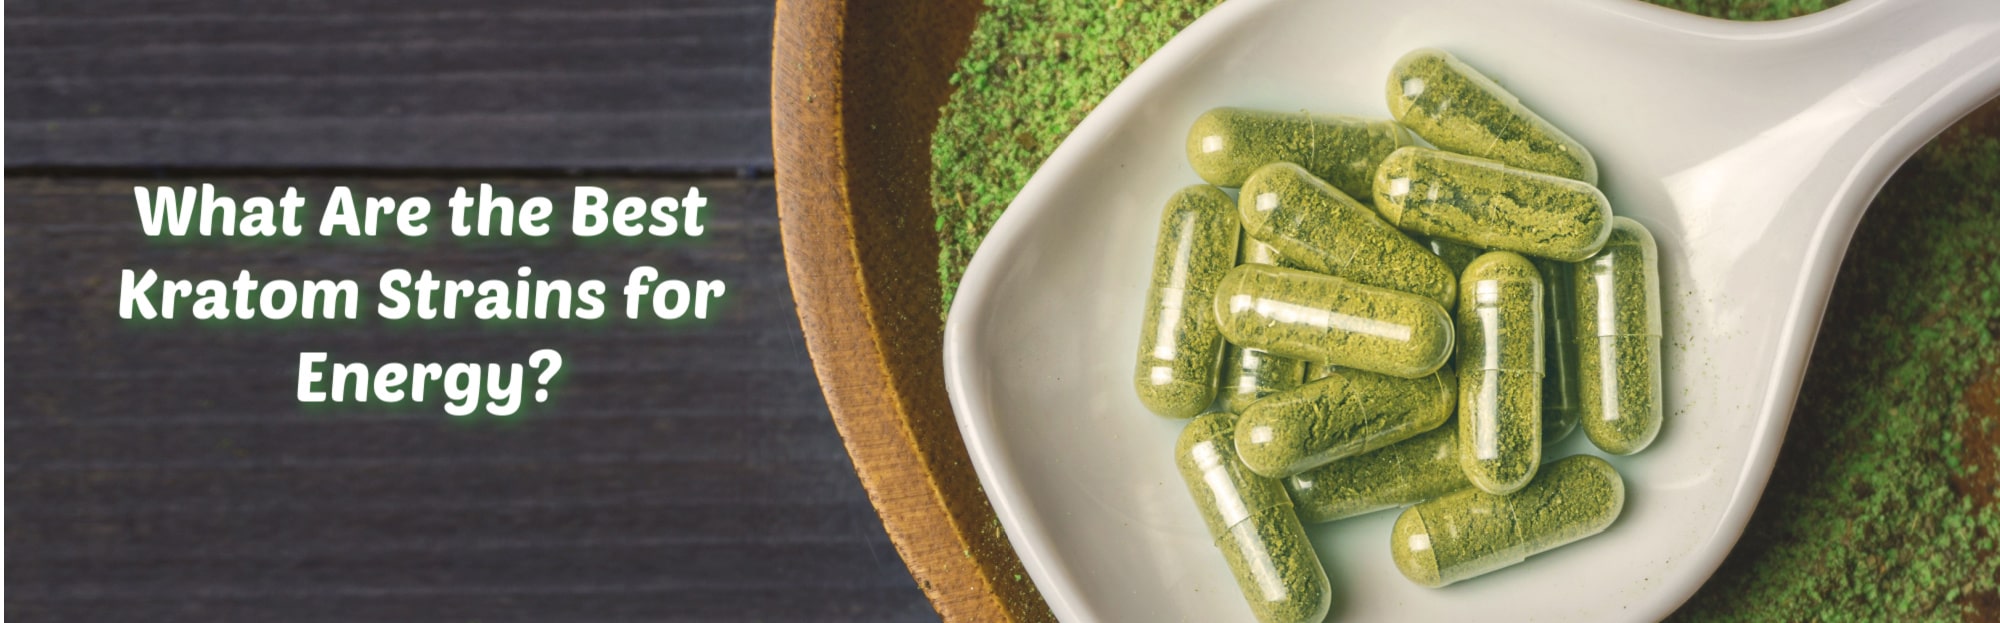 Best Kratom for Energy: Strains and Other Information